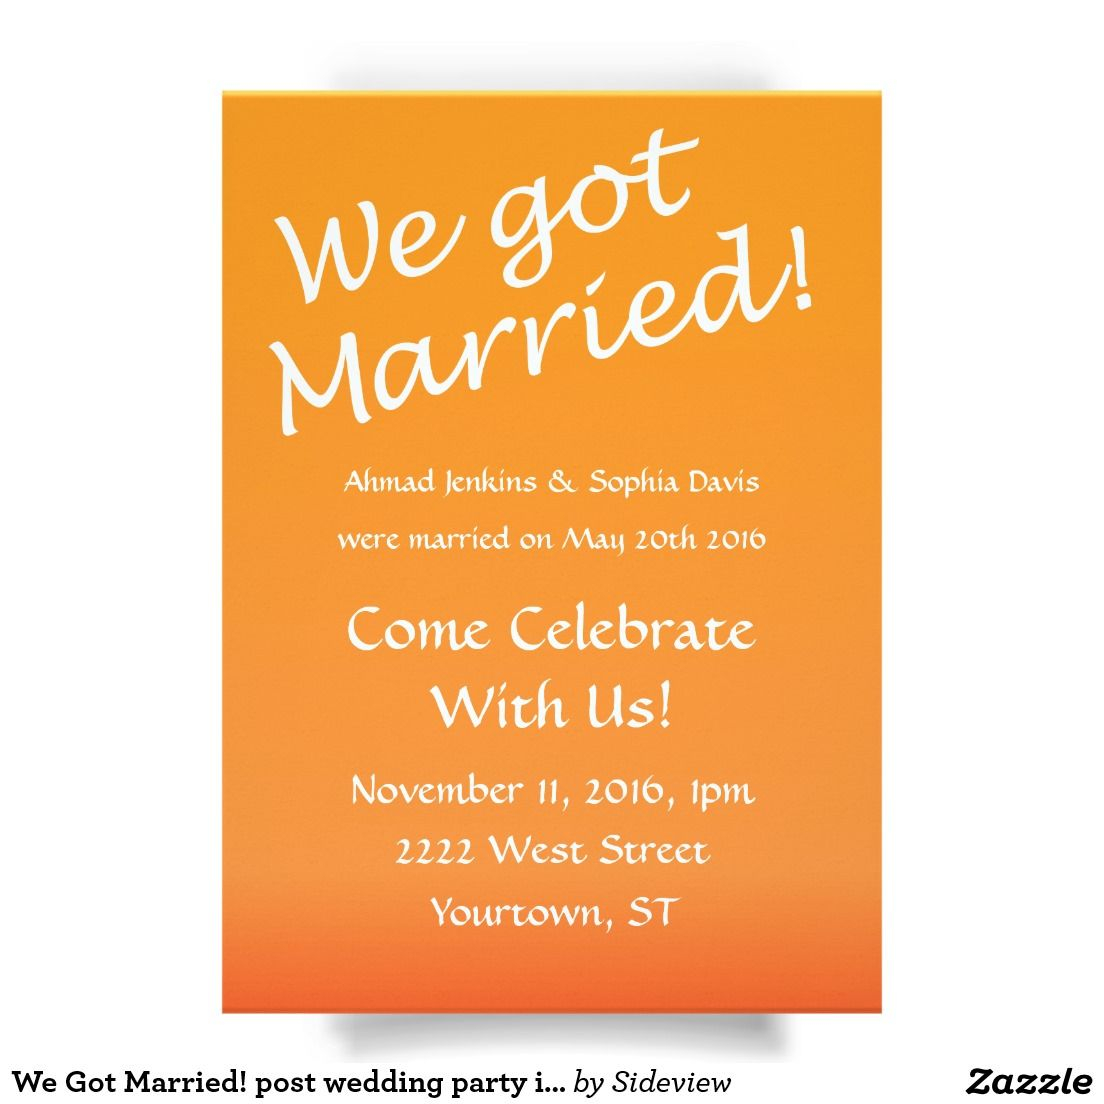 Post Wedding Party Invitations We Got Married Post Wedding Party Invitation 11112017 A S In